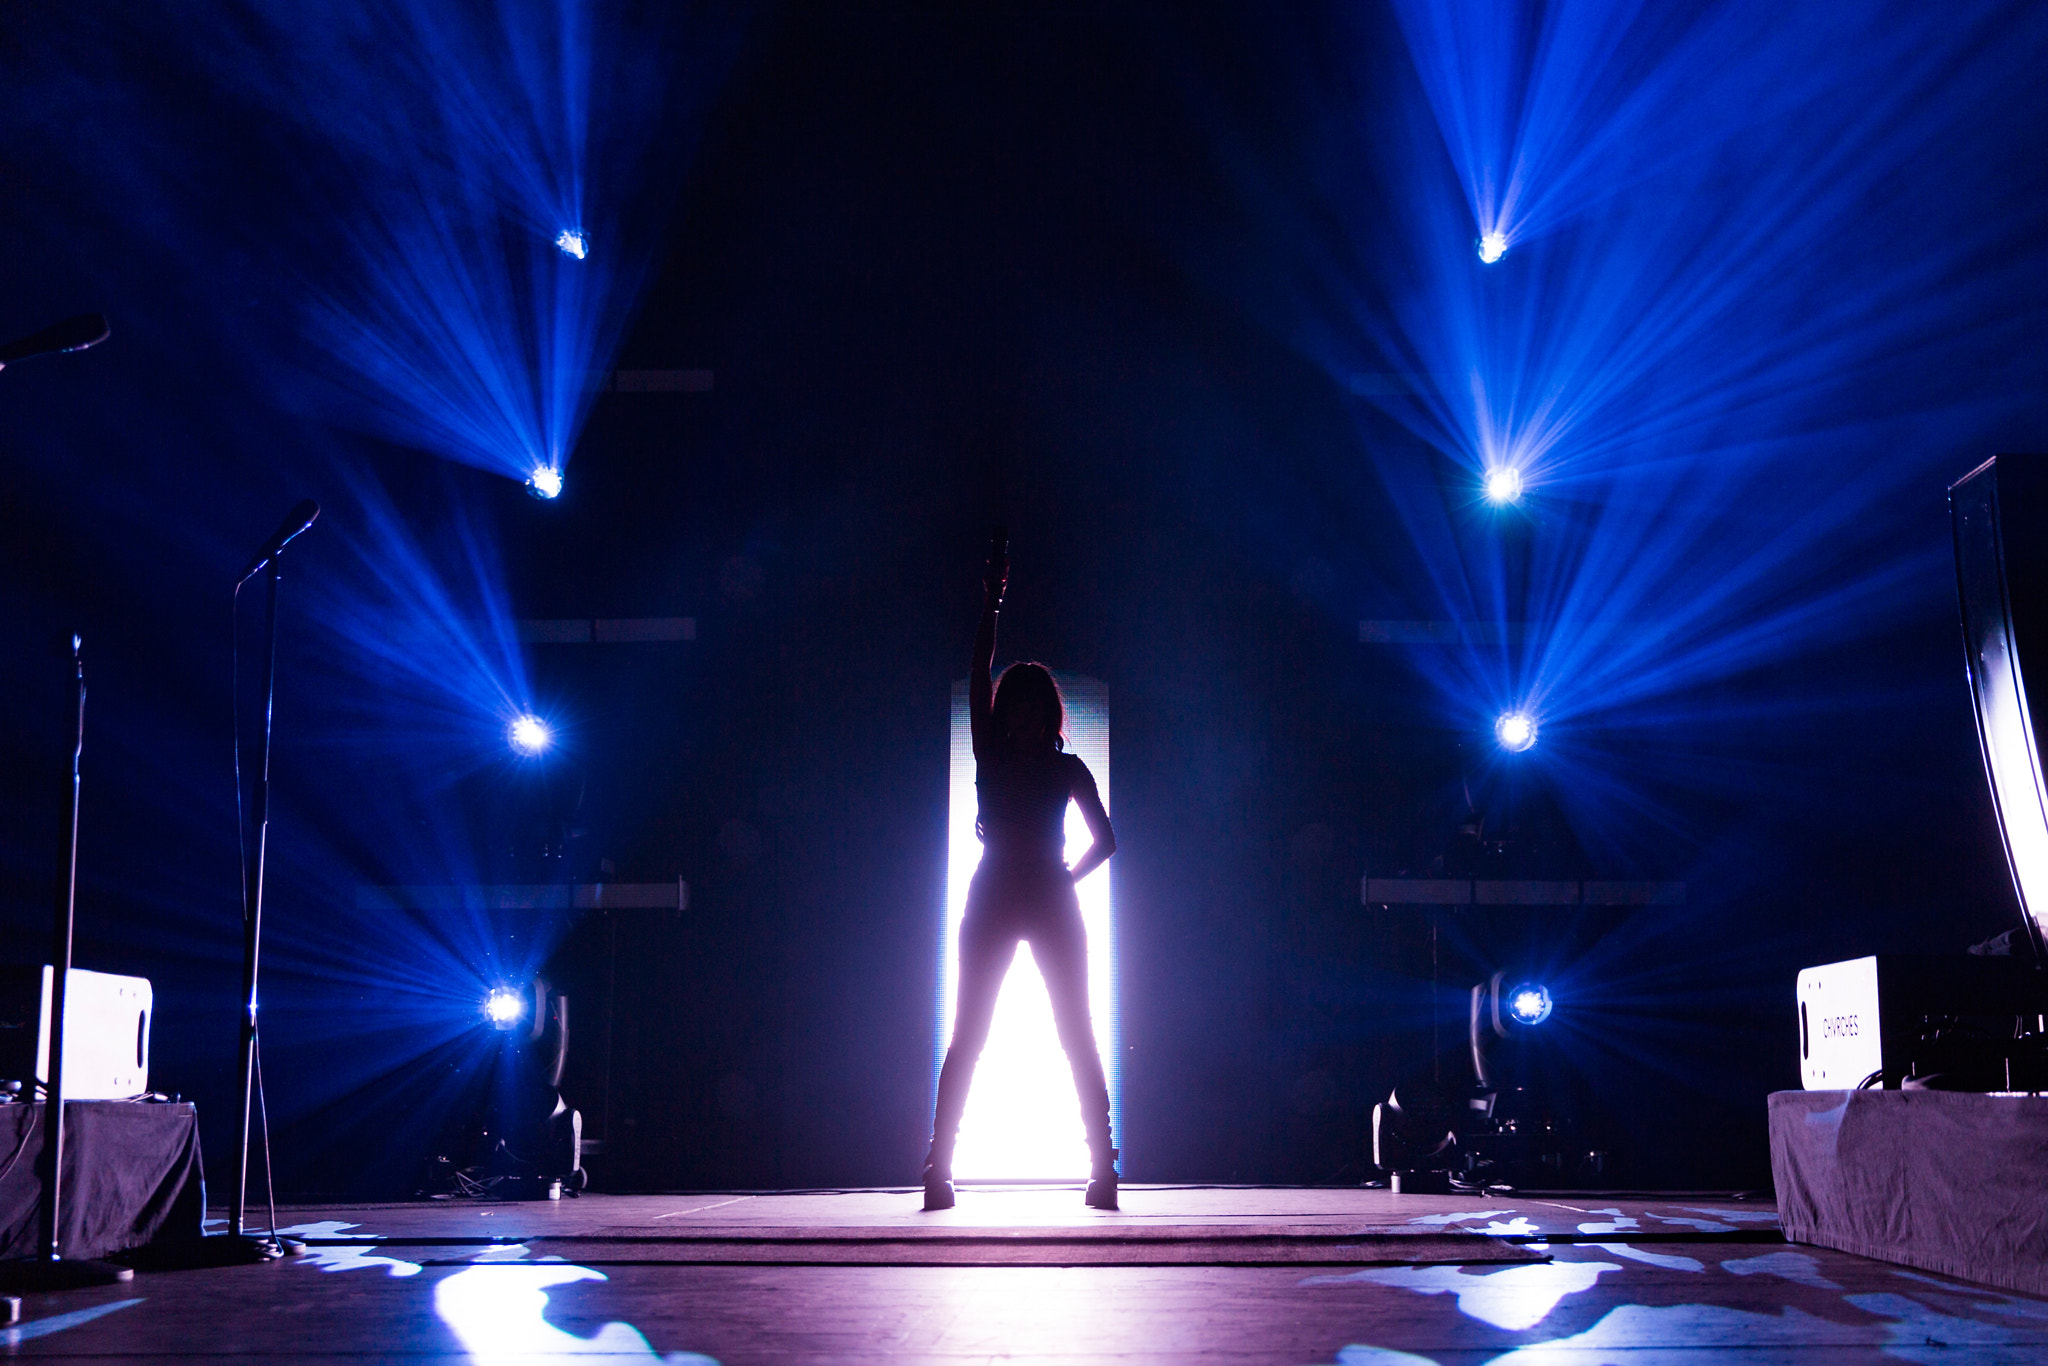 Concerts Silhouette Lauren Mayberry Chvrches Stages Stage Shots Stage Light Singer Musician 2048x1366